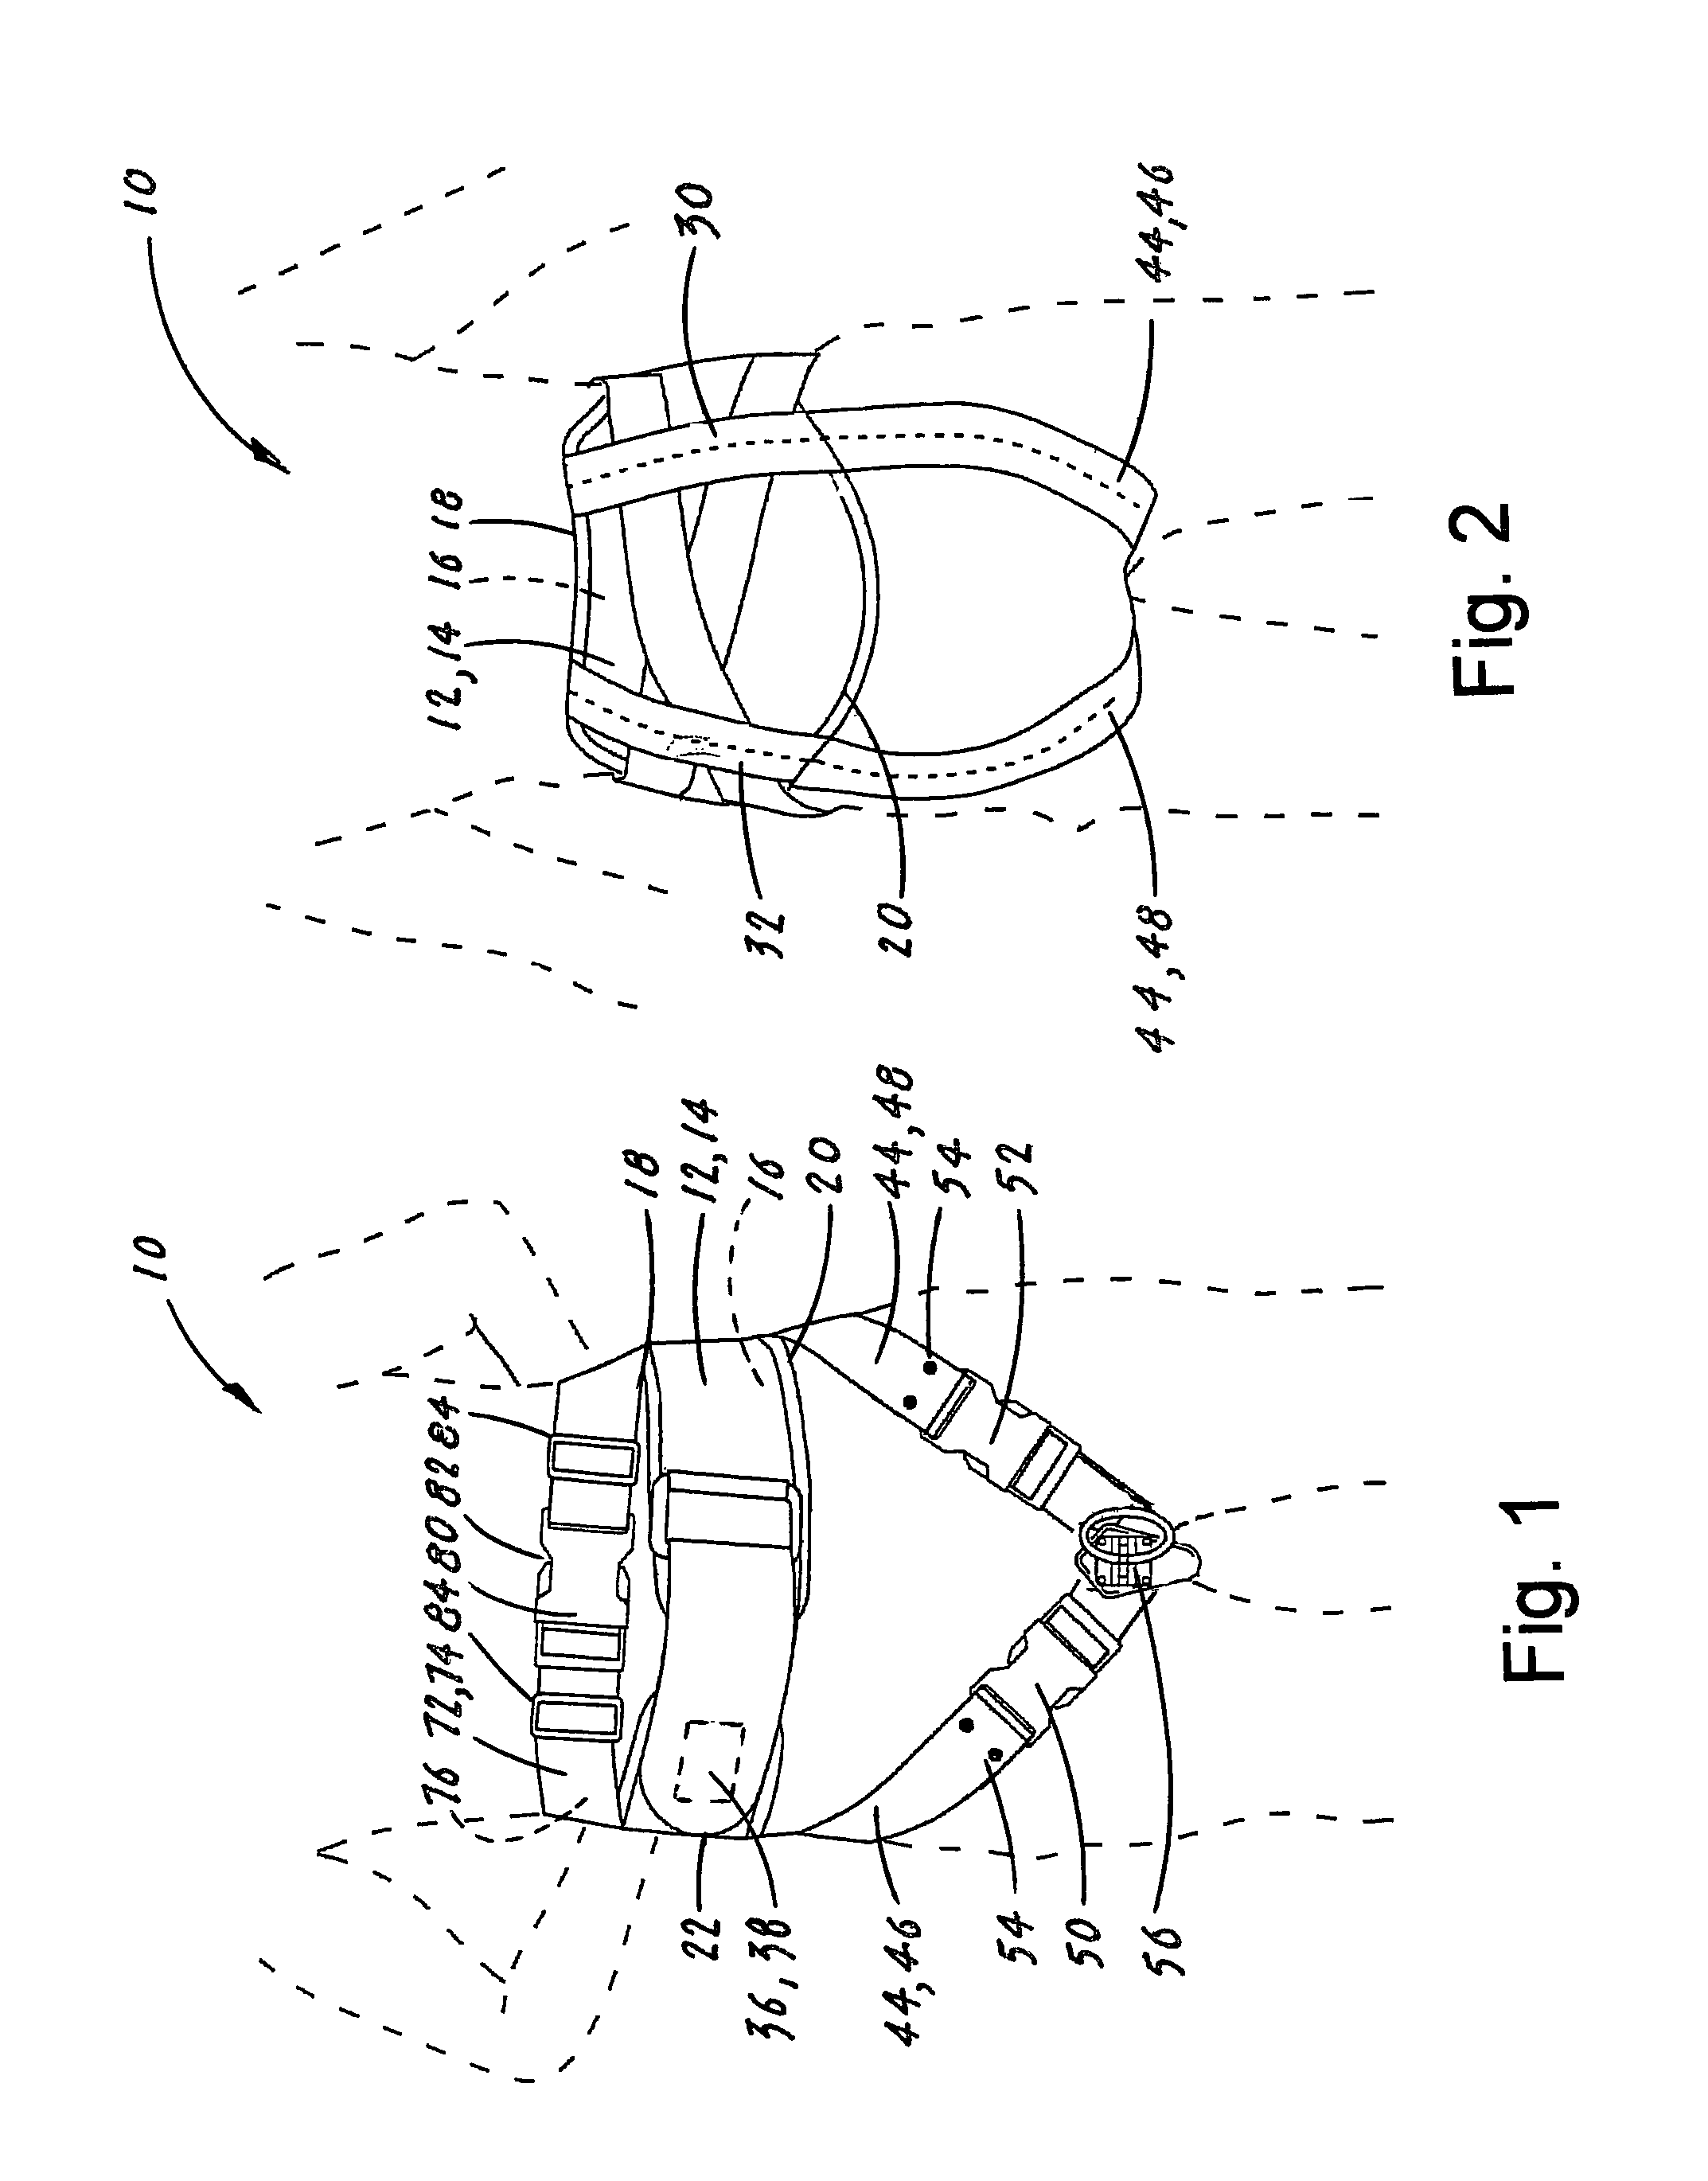 Spinal stretching and decompression device